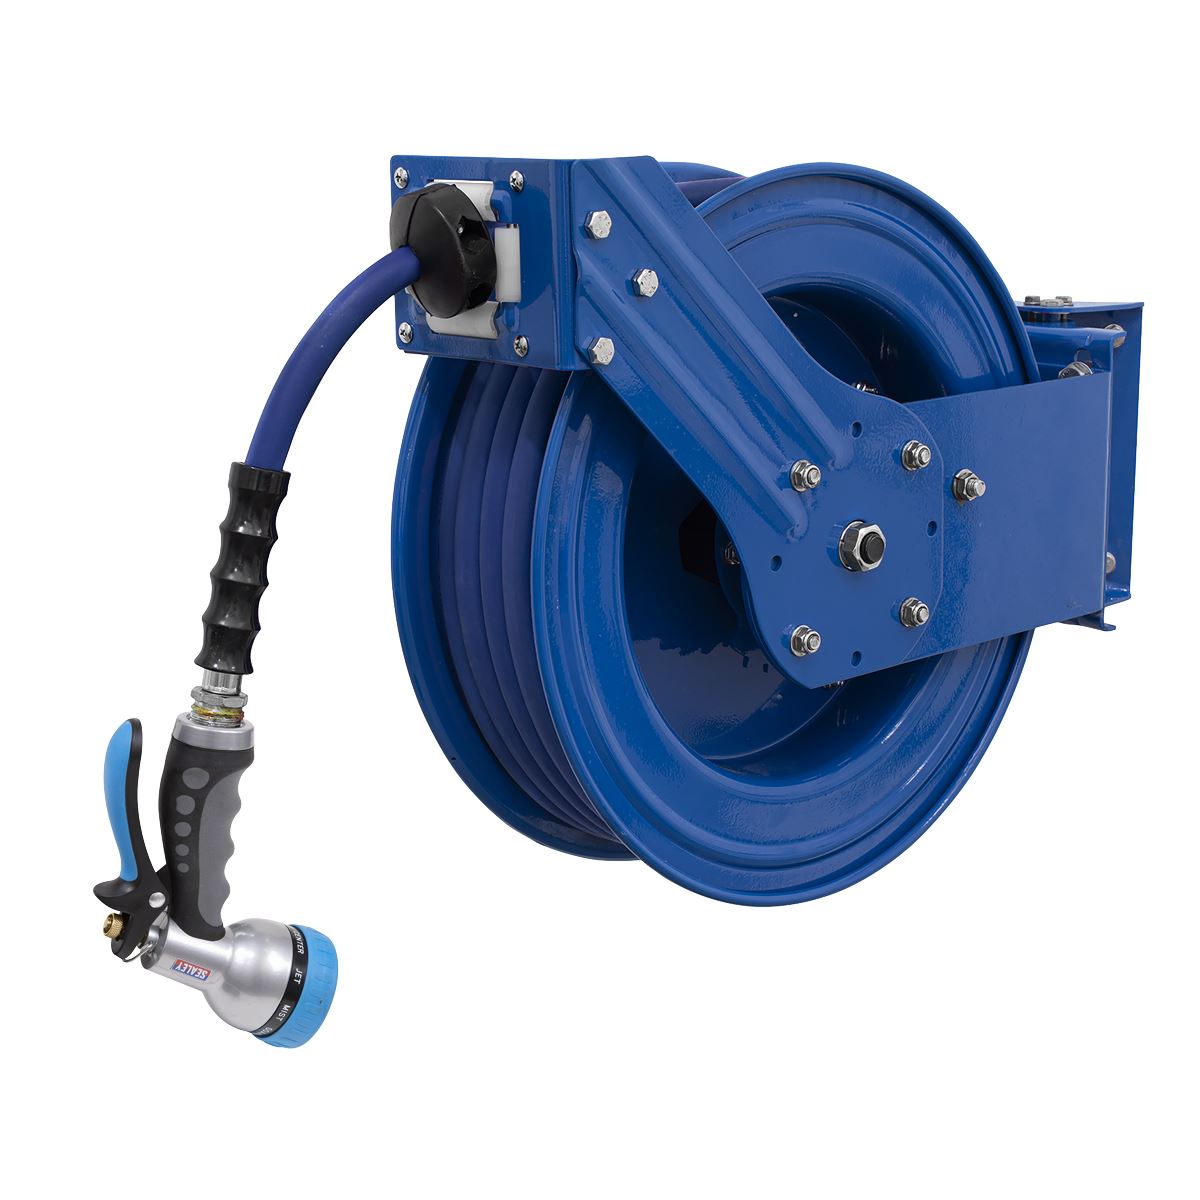 Sealey H/Duty Retractable Water Hose Reel 15m 13mm ID Rubber Hose WHR1512